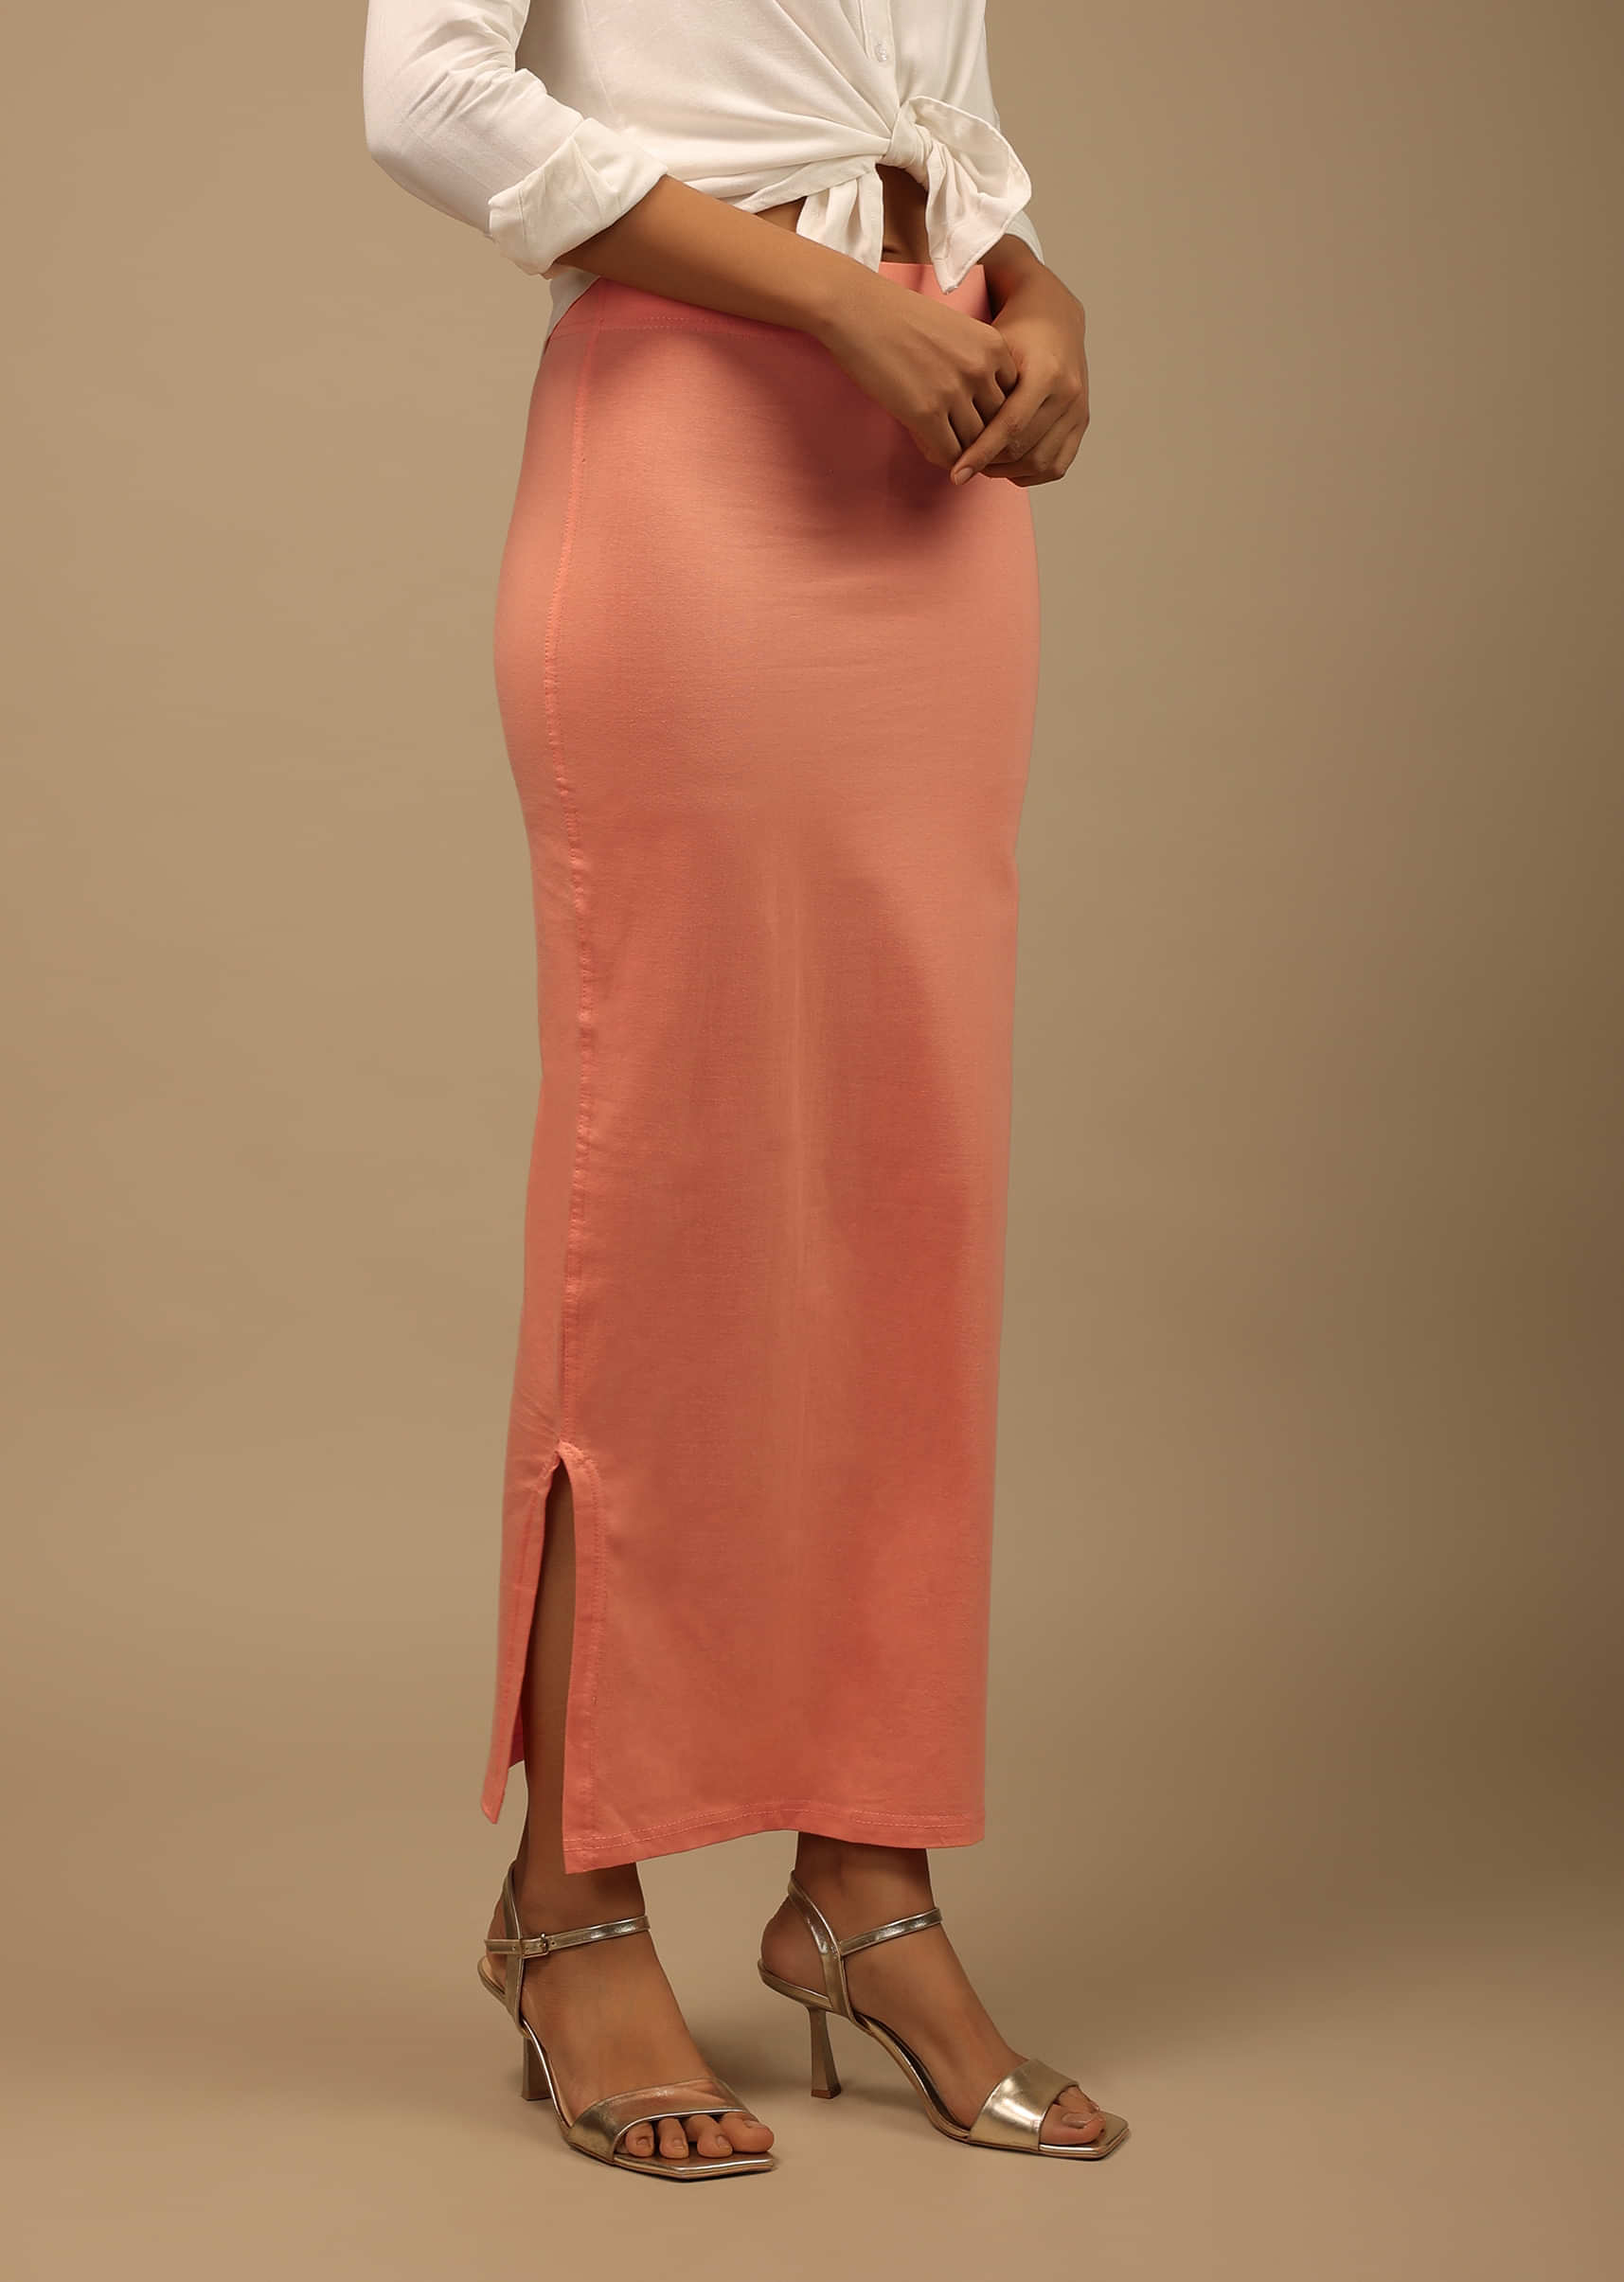 Coral Peach Shapewear Saree Petticoat In Cotton Lycra With Elastic Waistband And Slit